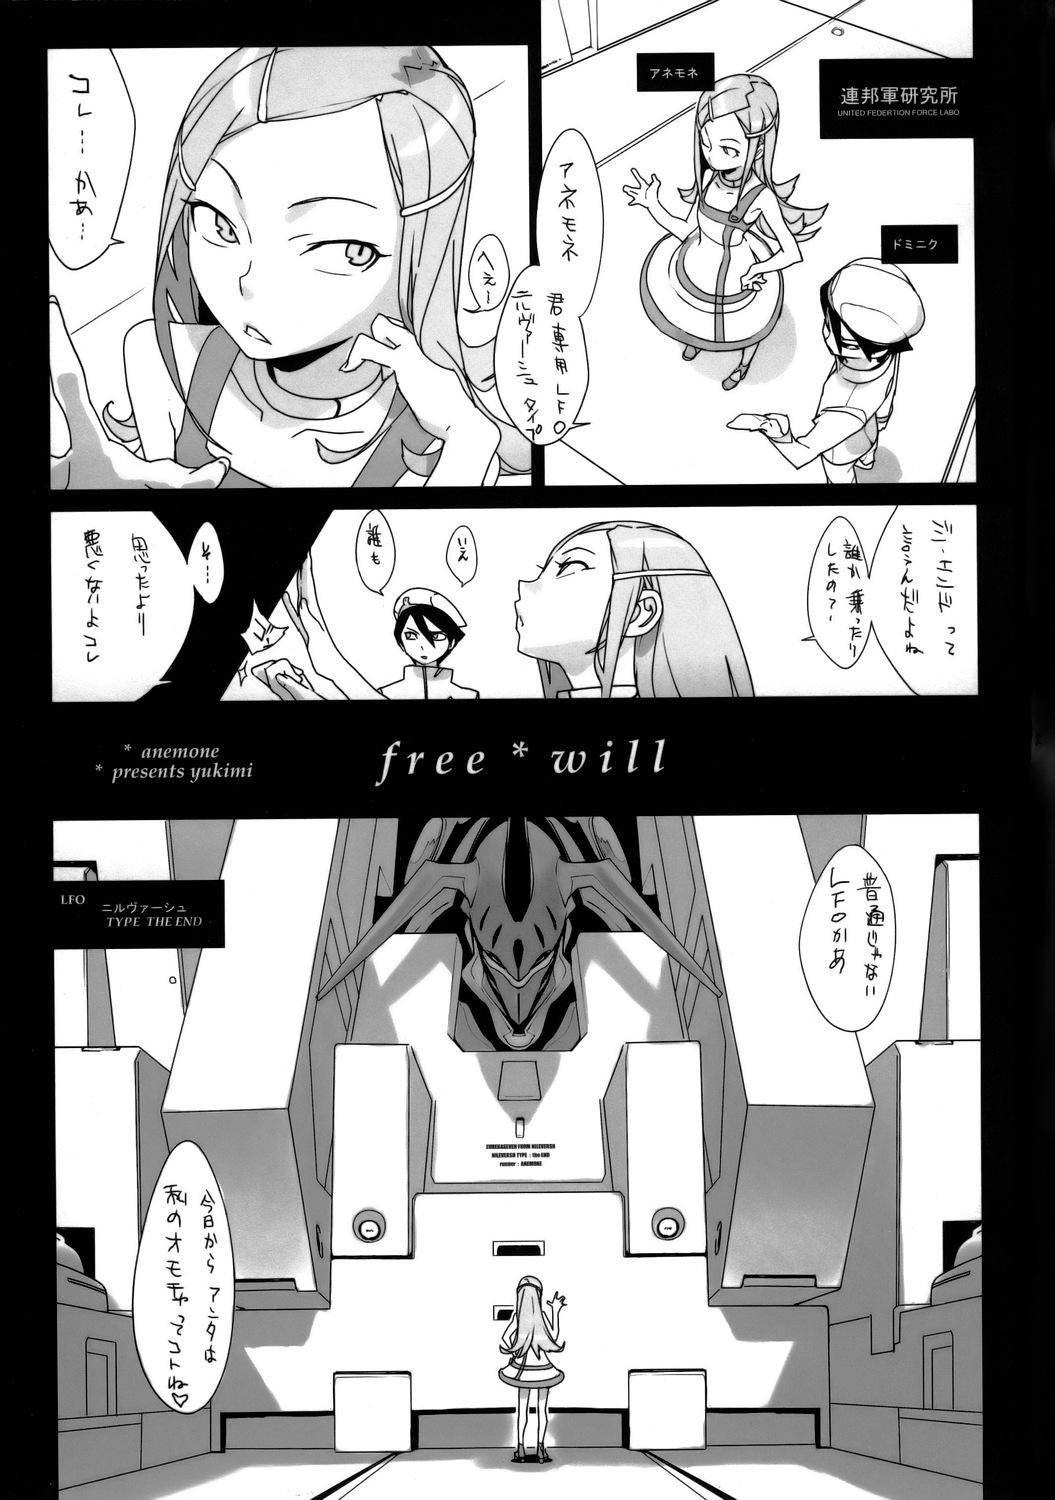 Soles Free Will - Eureka 7 Close Up - Page 2